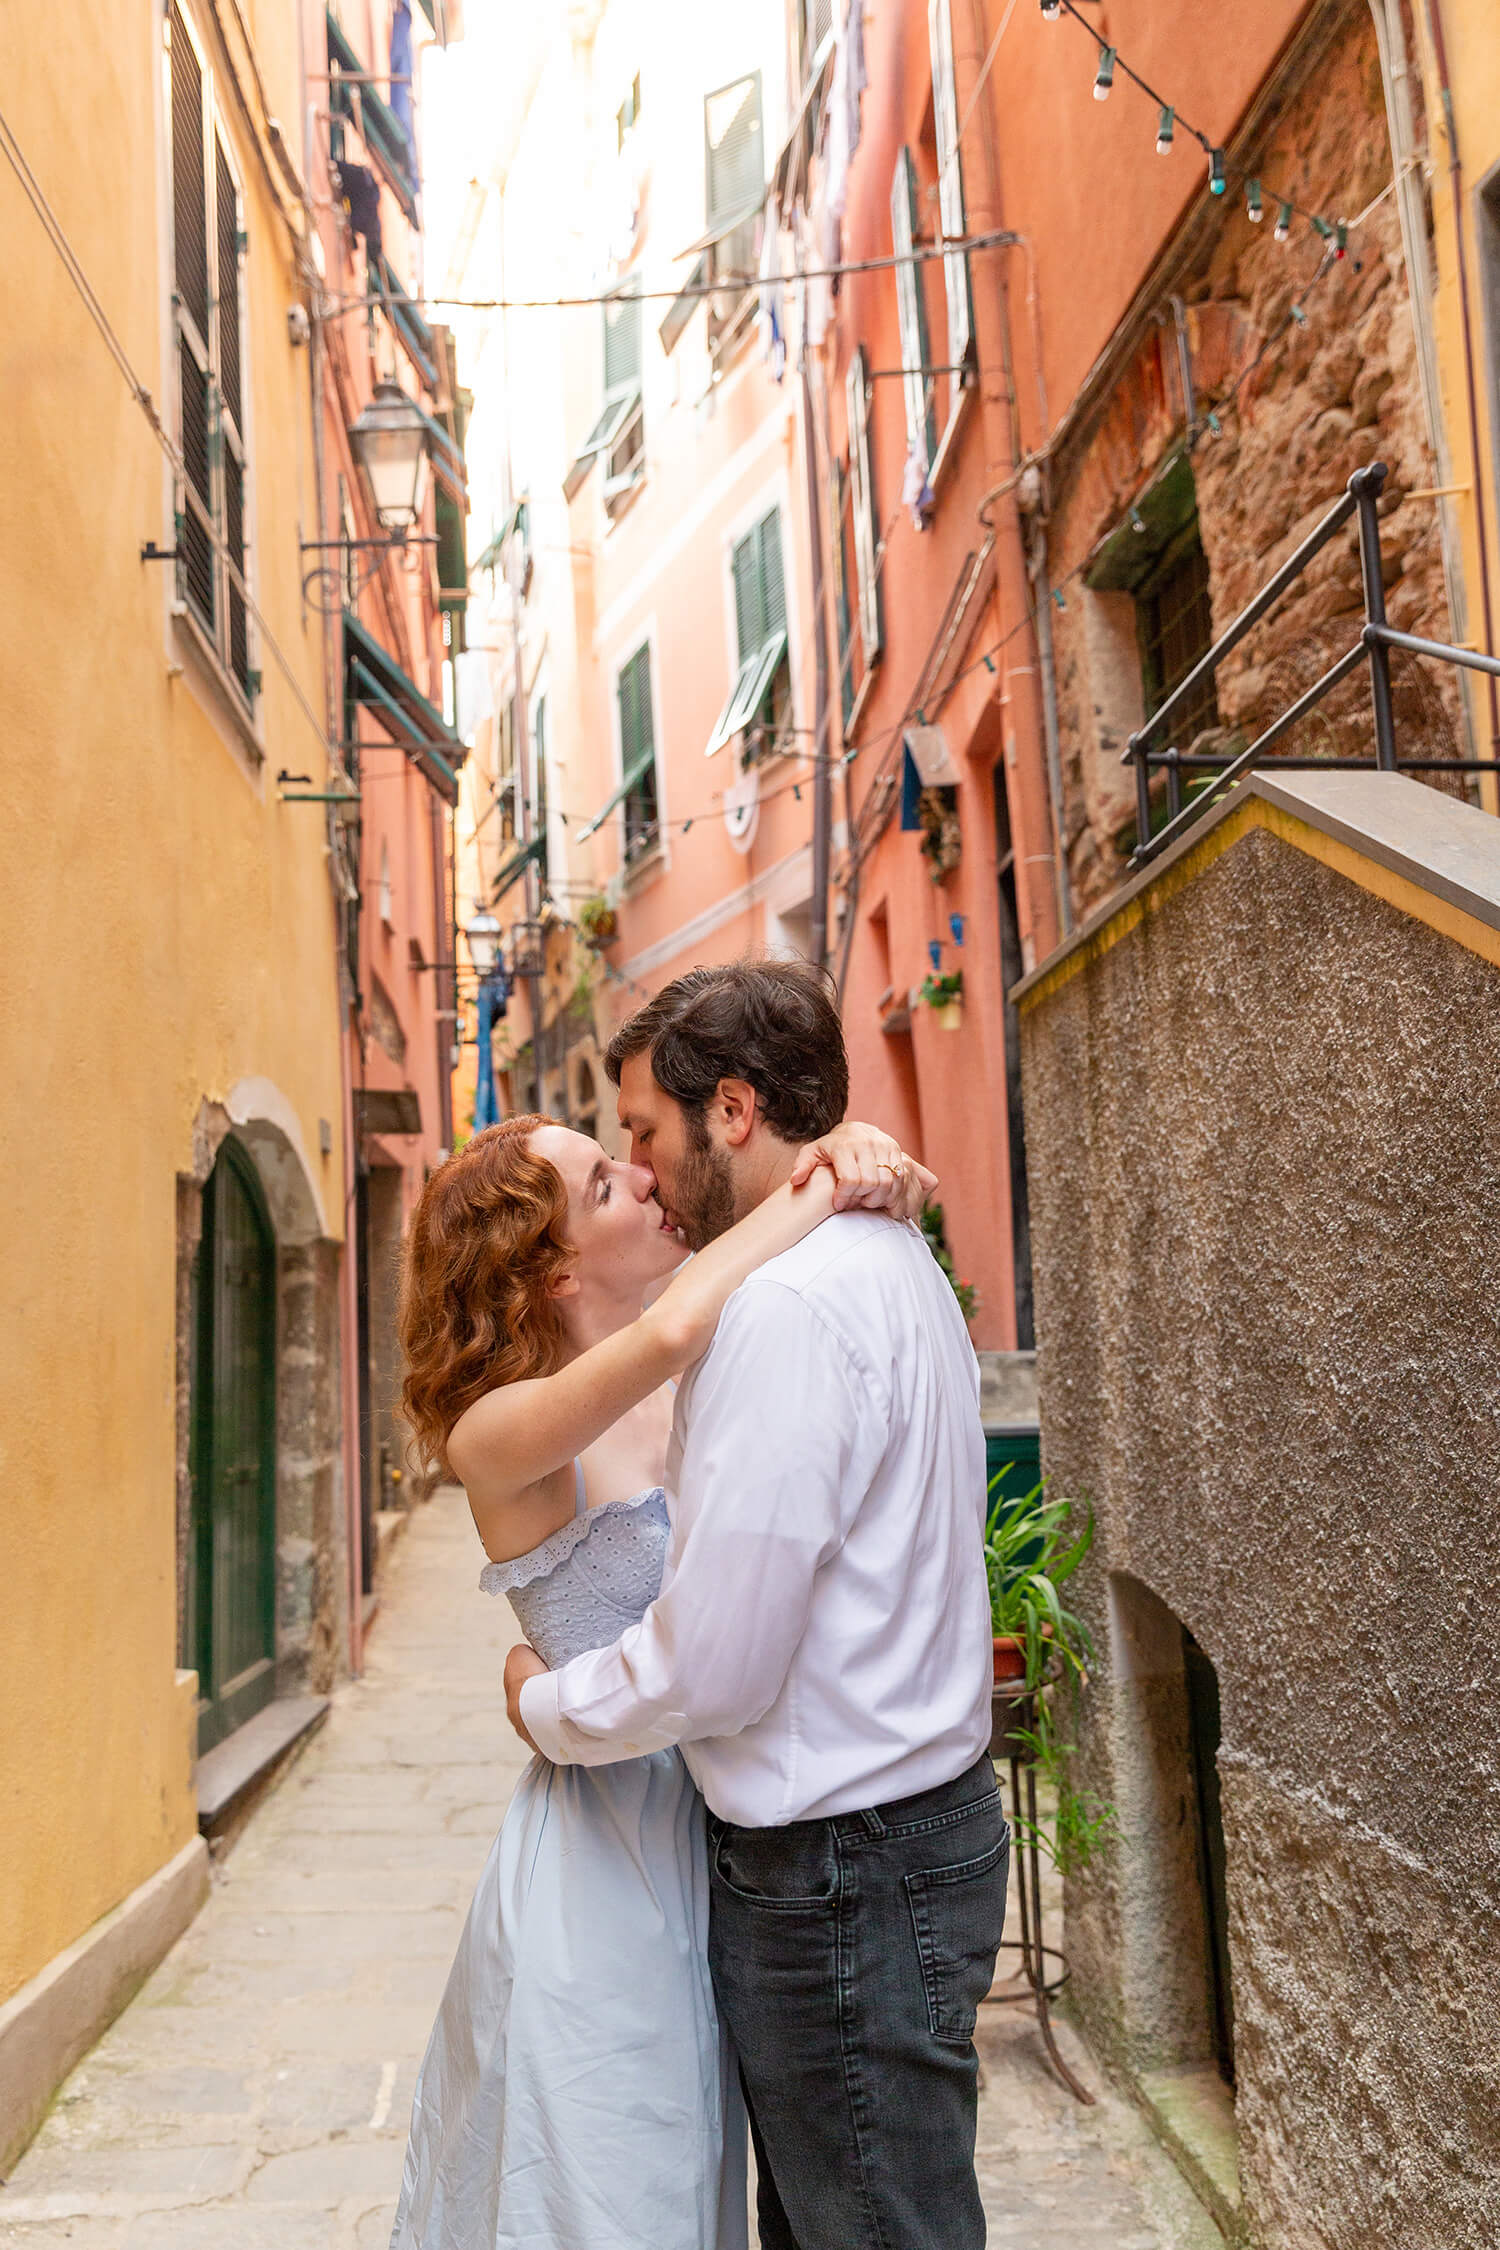 Couple kissing during their engagement photo shoot in Vernazza, Cinque Terre